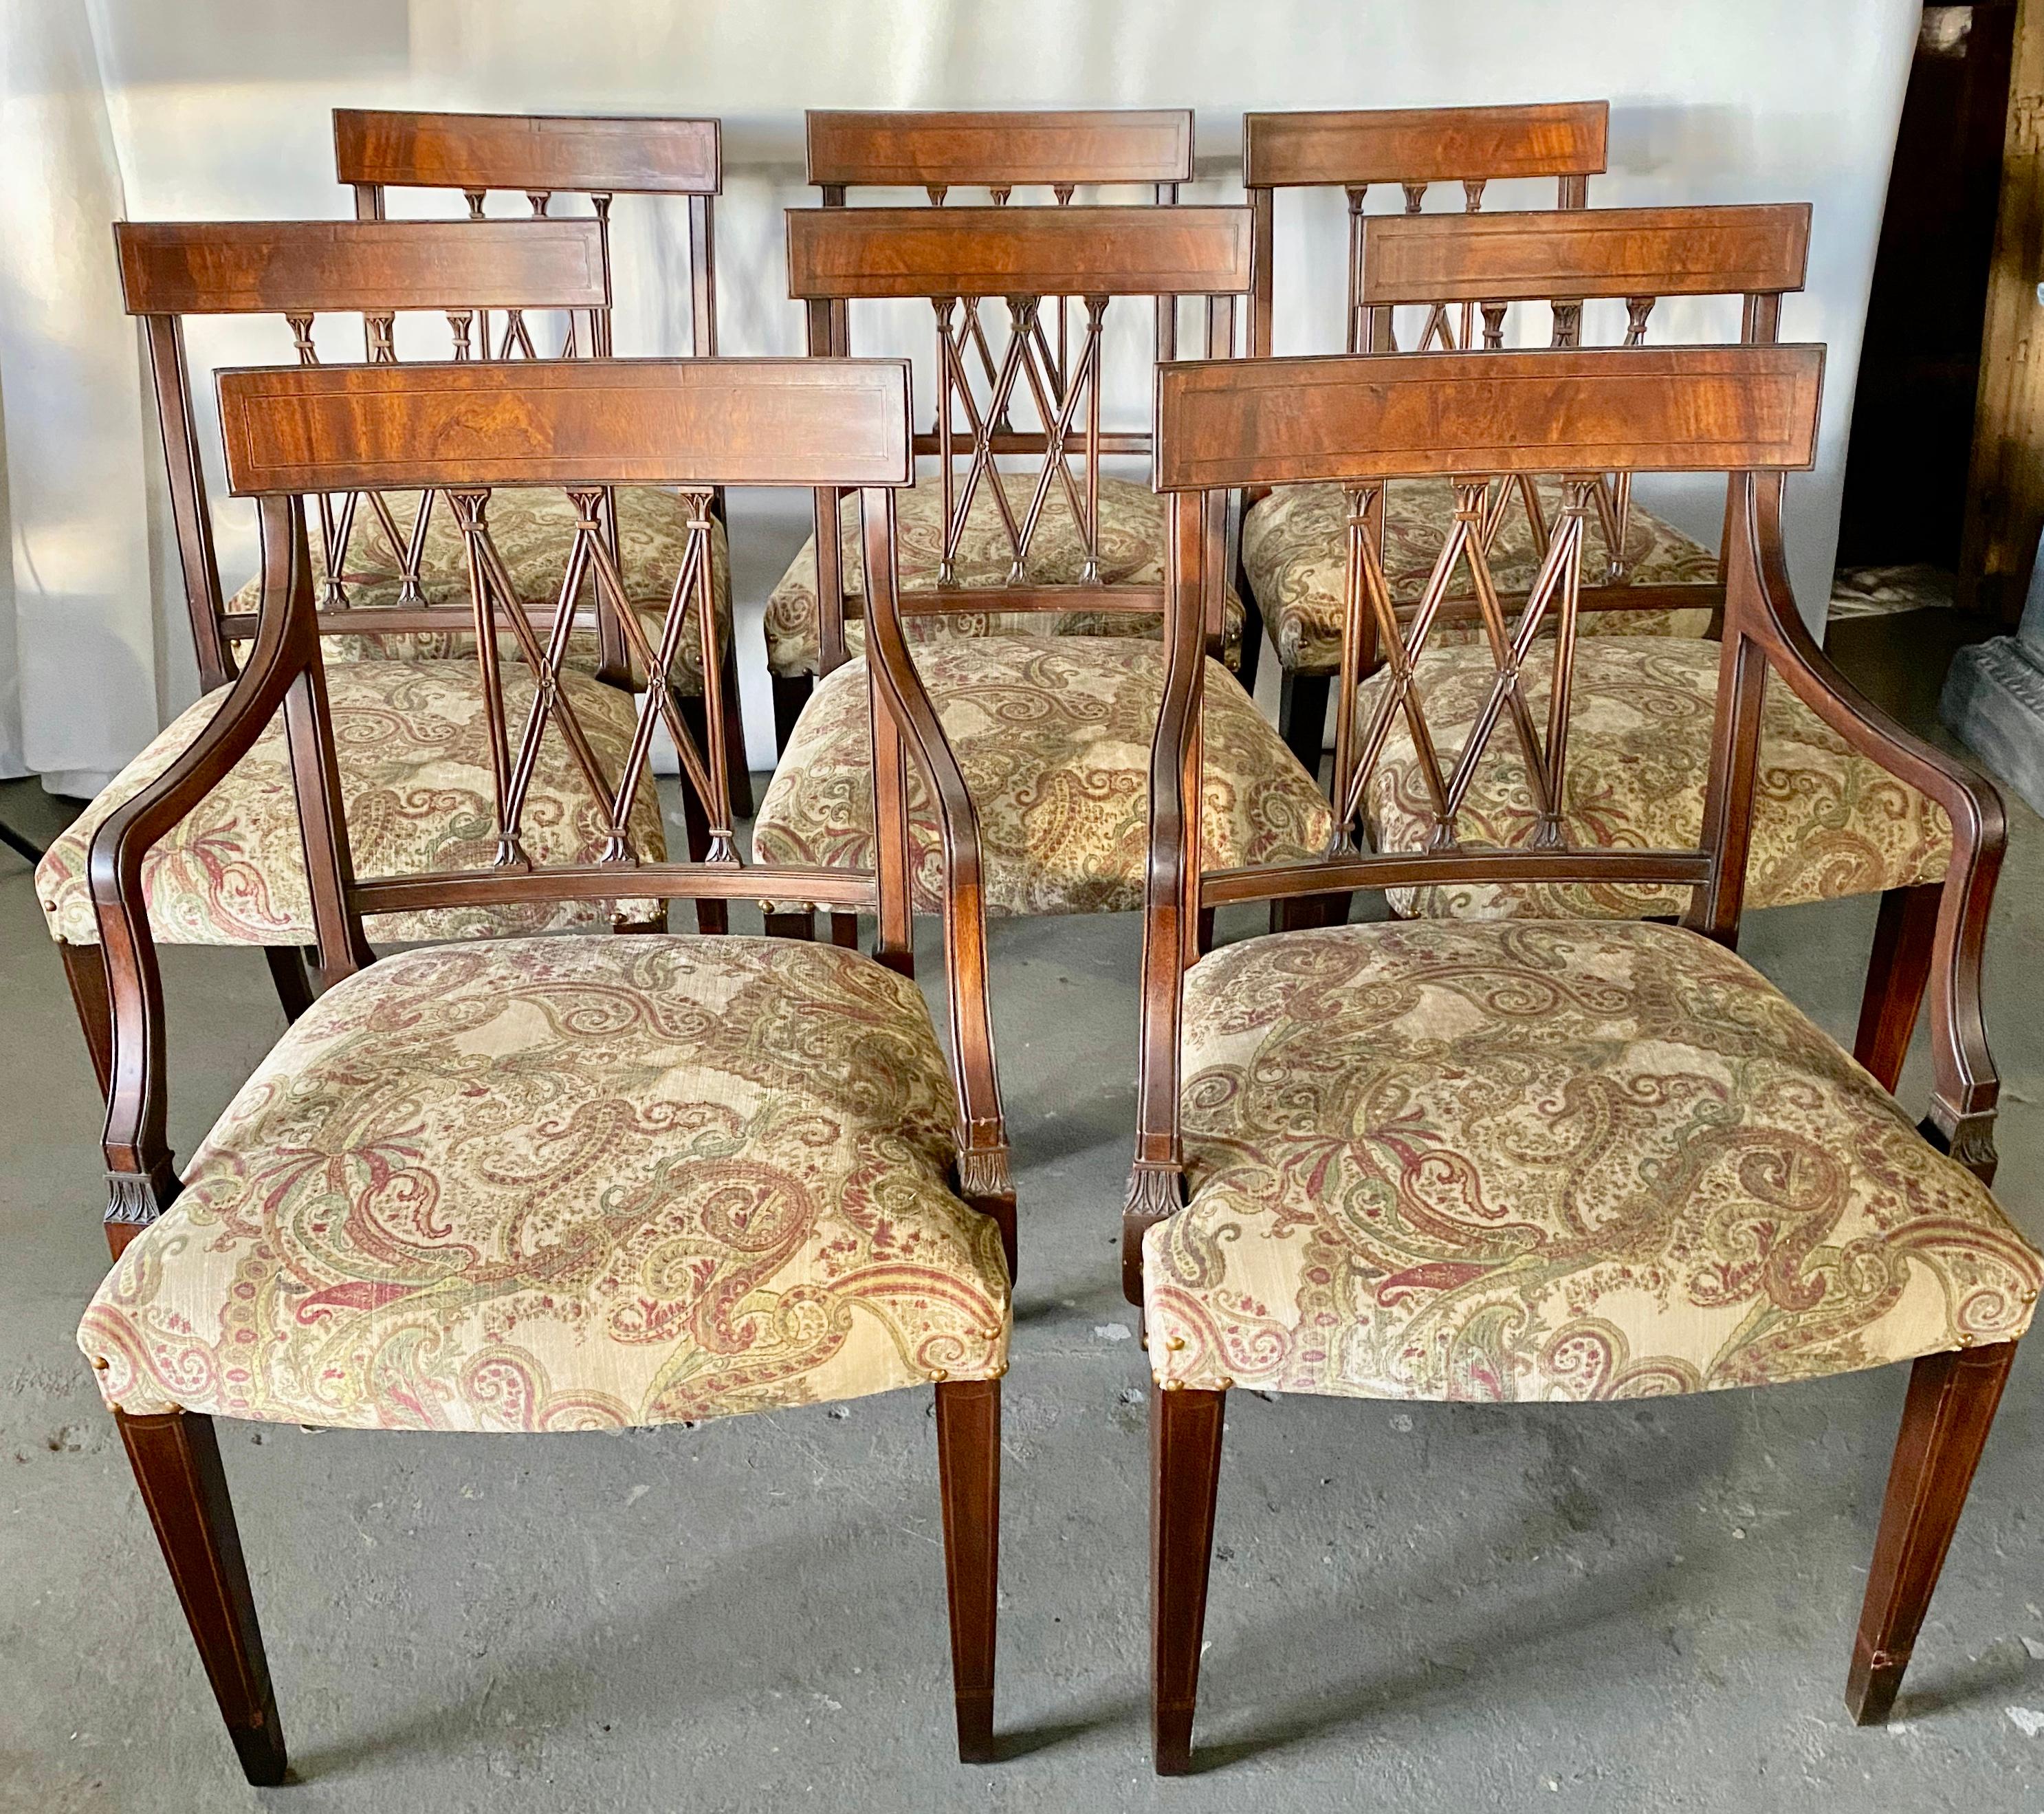 A very elegant set of eight Sheraton Revival mahogany dining chairs, each with beautiful carved X-frame backs. The seats are upholstered in a paisley pattern print, raised on tapering legs. The set consists of 2 arm chairs and 6 side chairs.
Arm